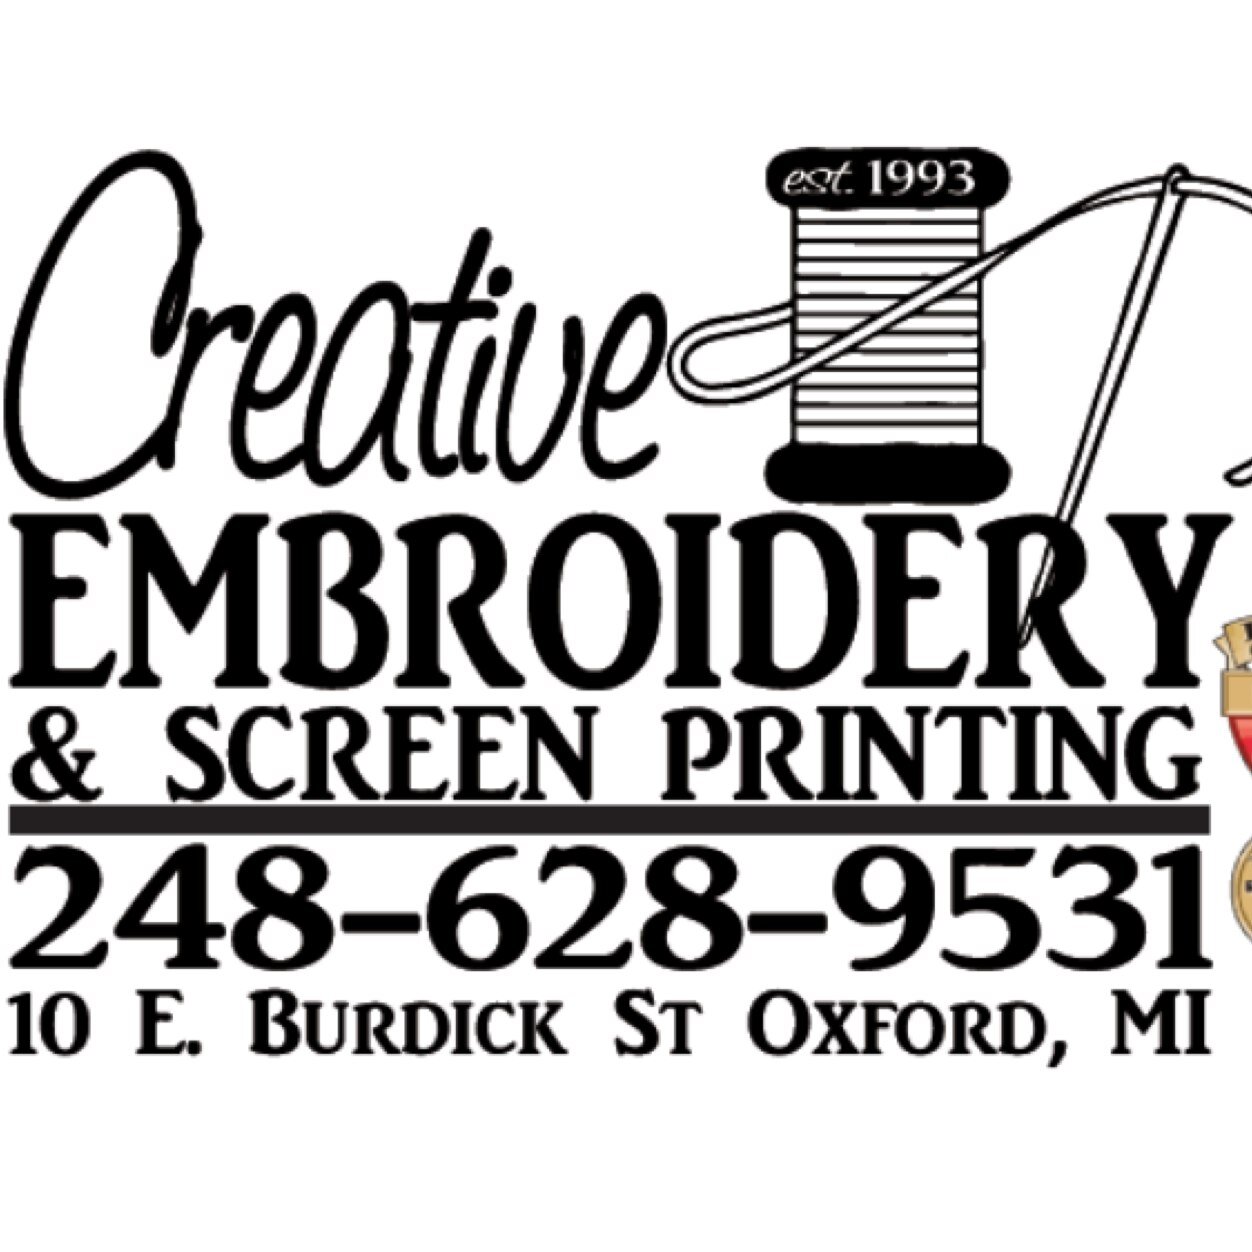 We offer our customers and clients personalized embroidered gifts and products for any occasion, event, or business. Now offering Screen Printing!